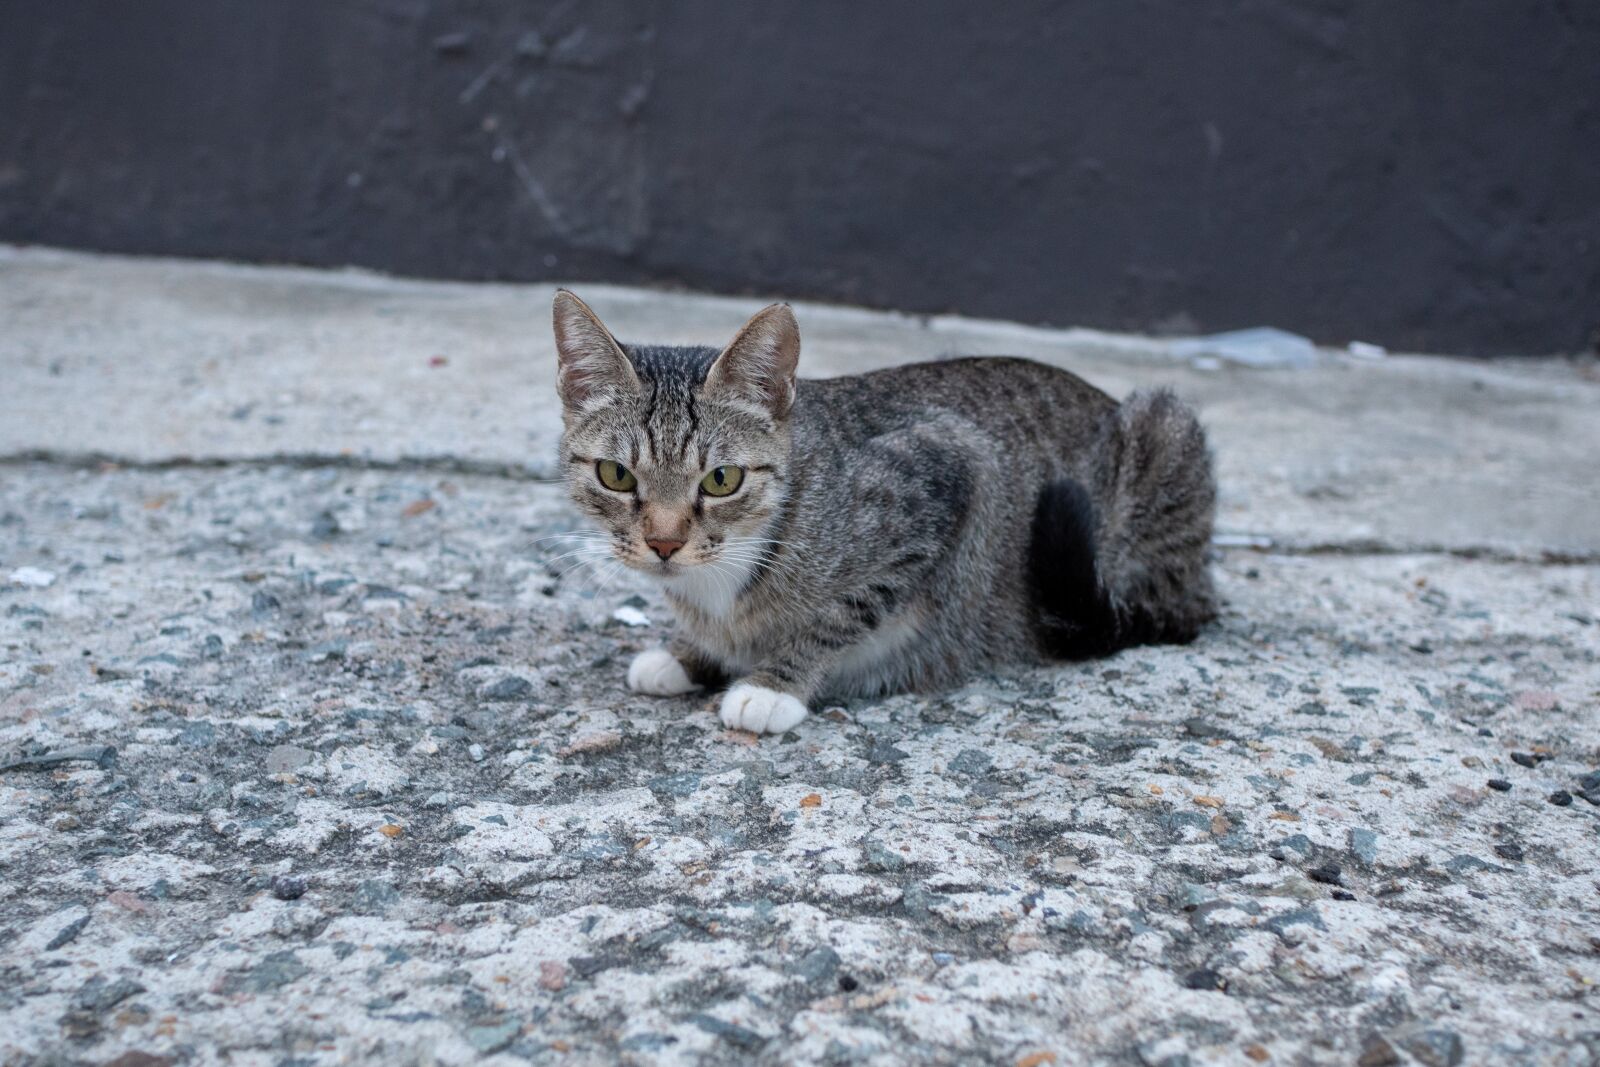 Sony a6500 sample photo. Cat, animal, feral cat photography